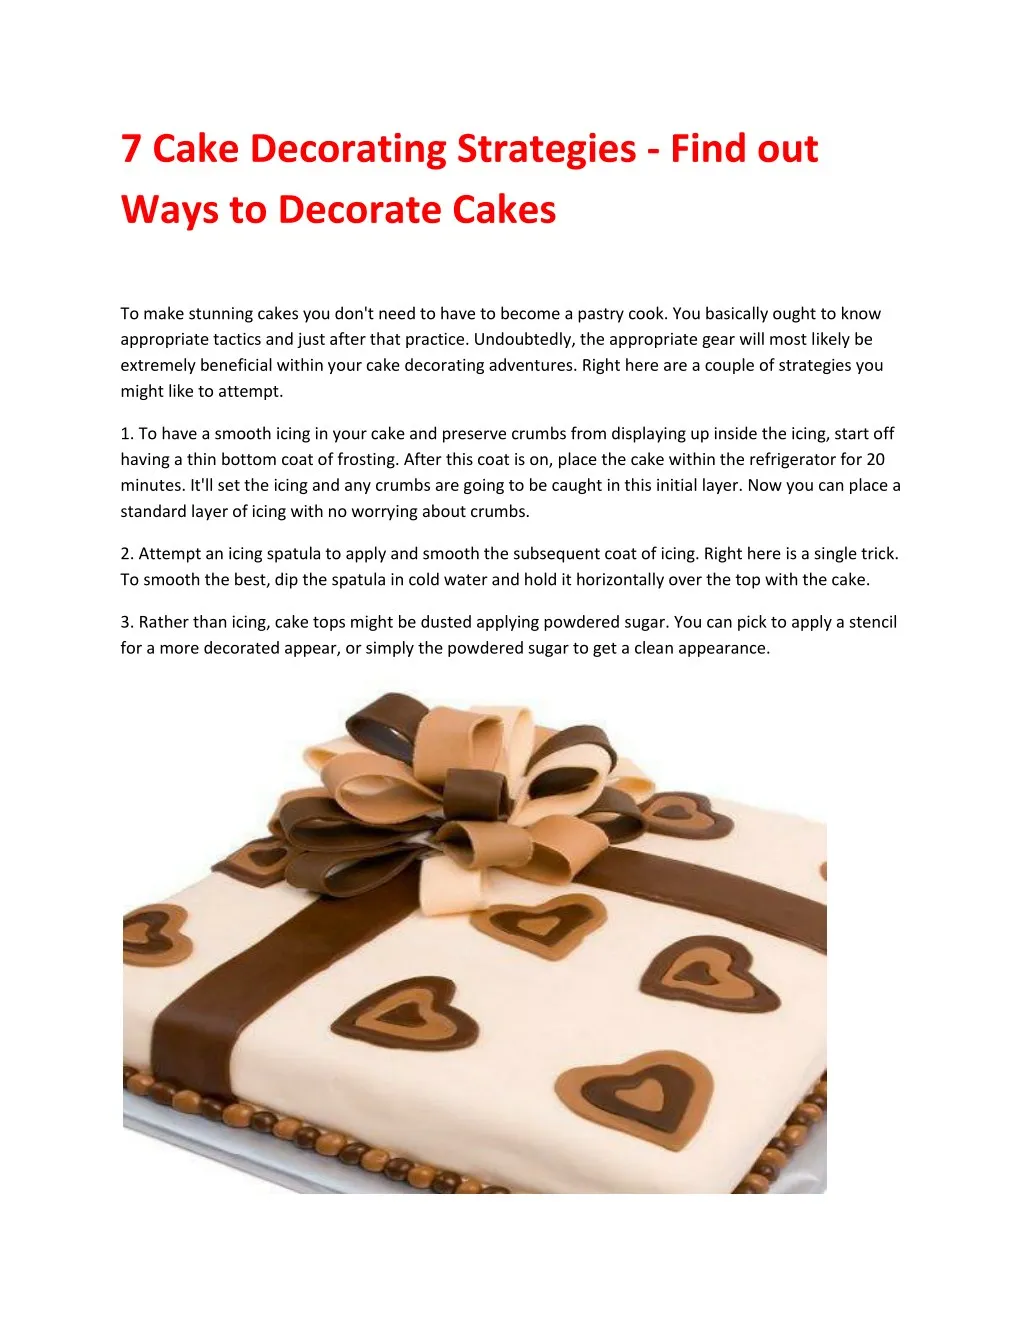 7 cake decorating strategies find out ways